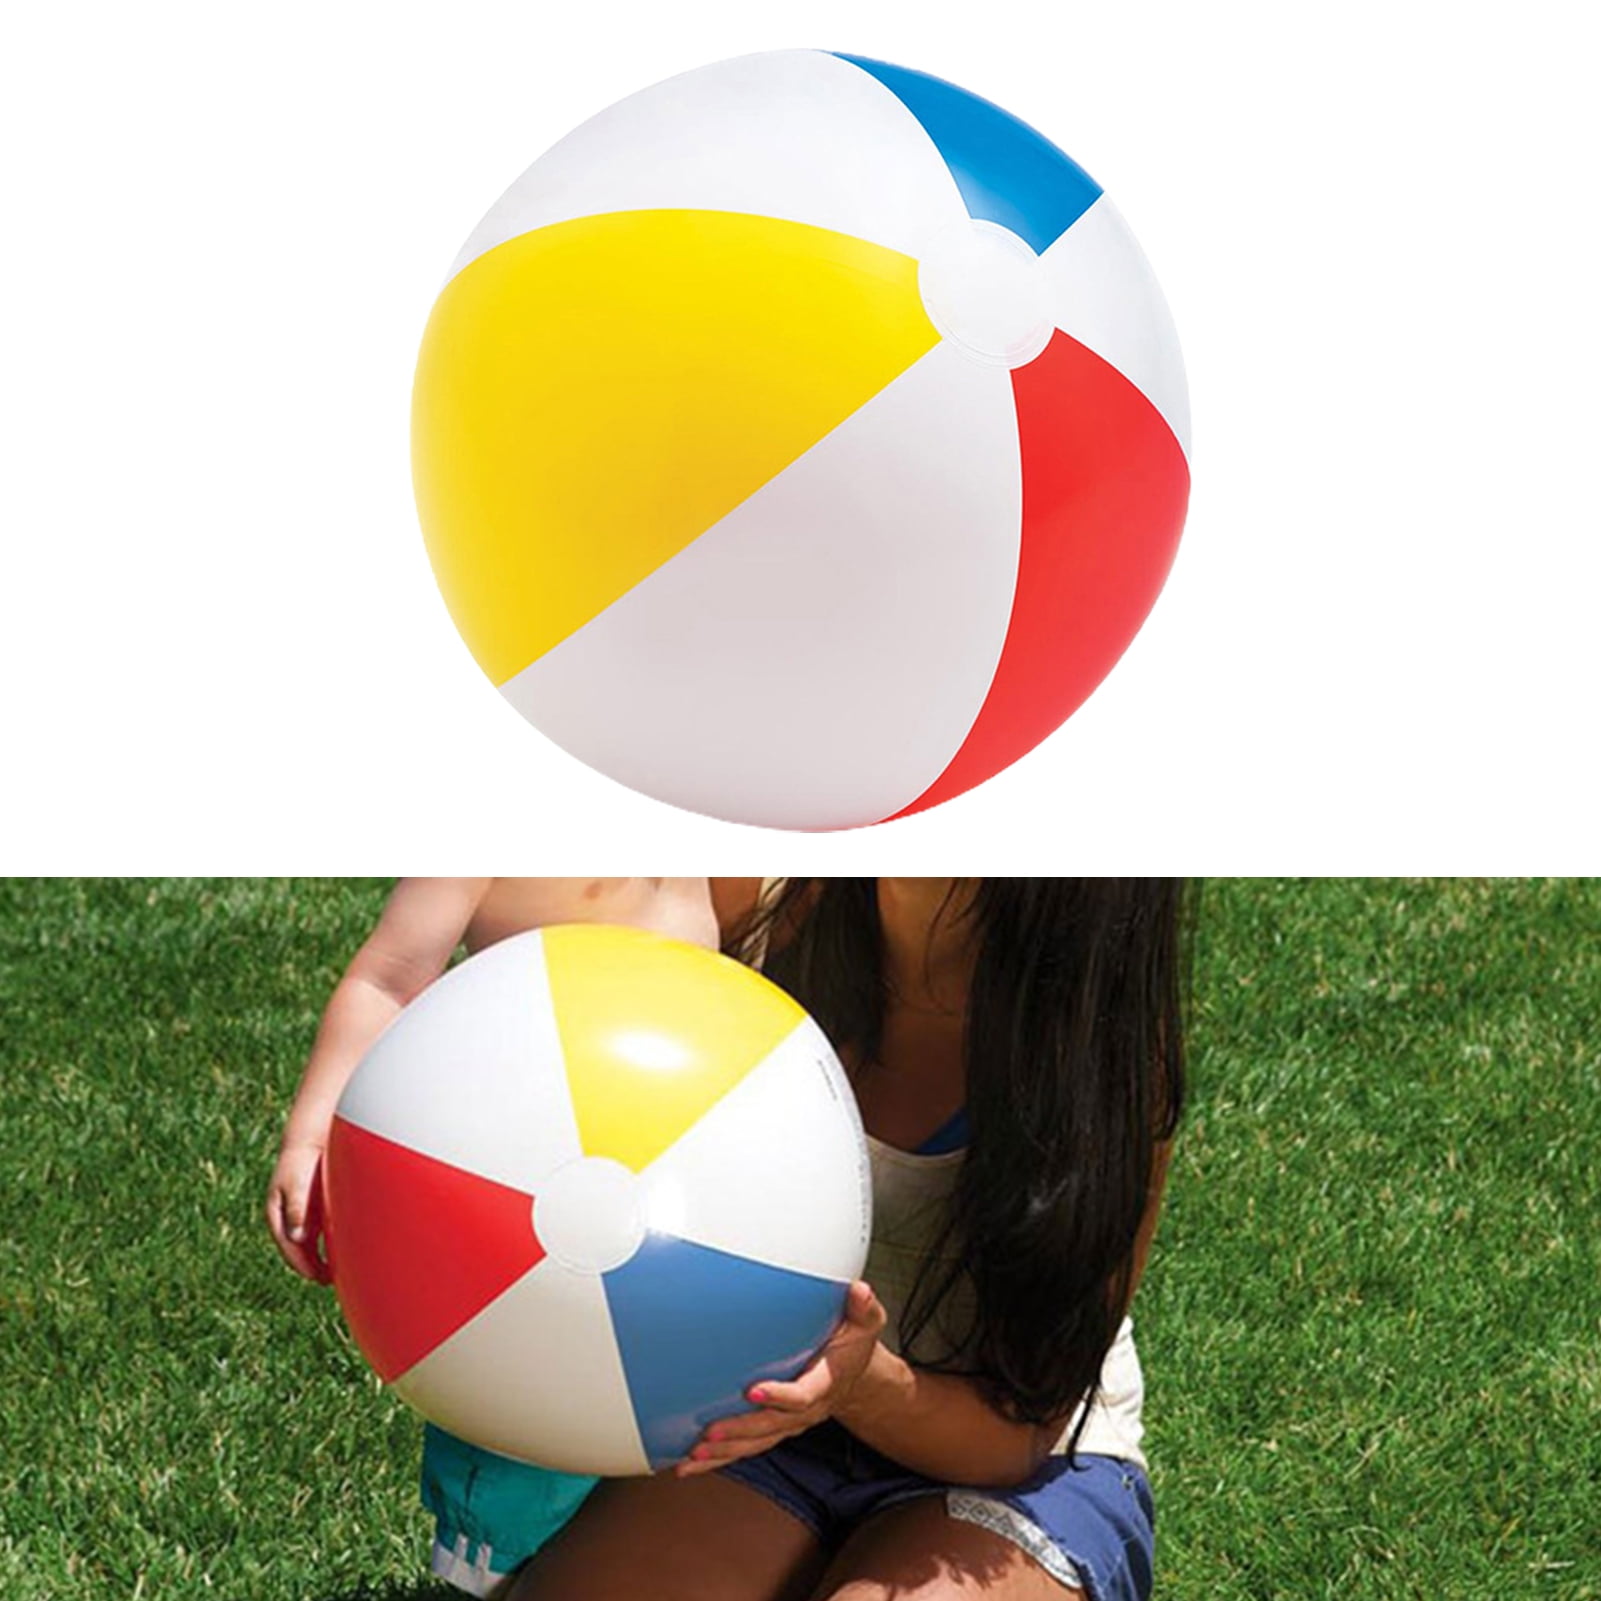 Intex Inflatable Blowup 16" BEACH BALL Party Swimming Garden Toy Qaulity59010NP 